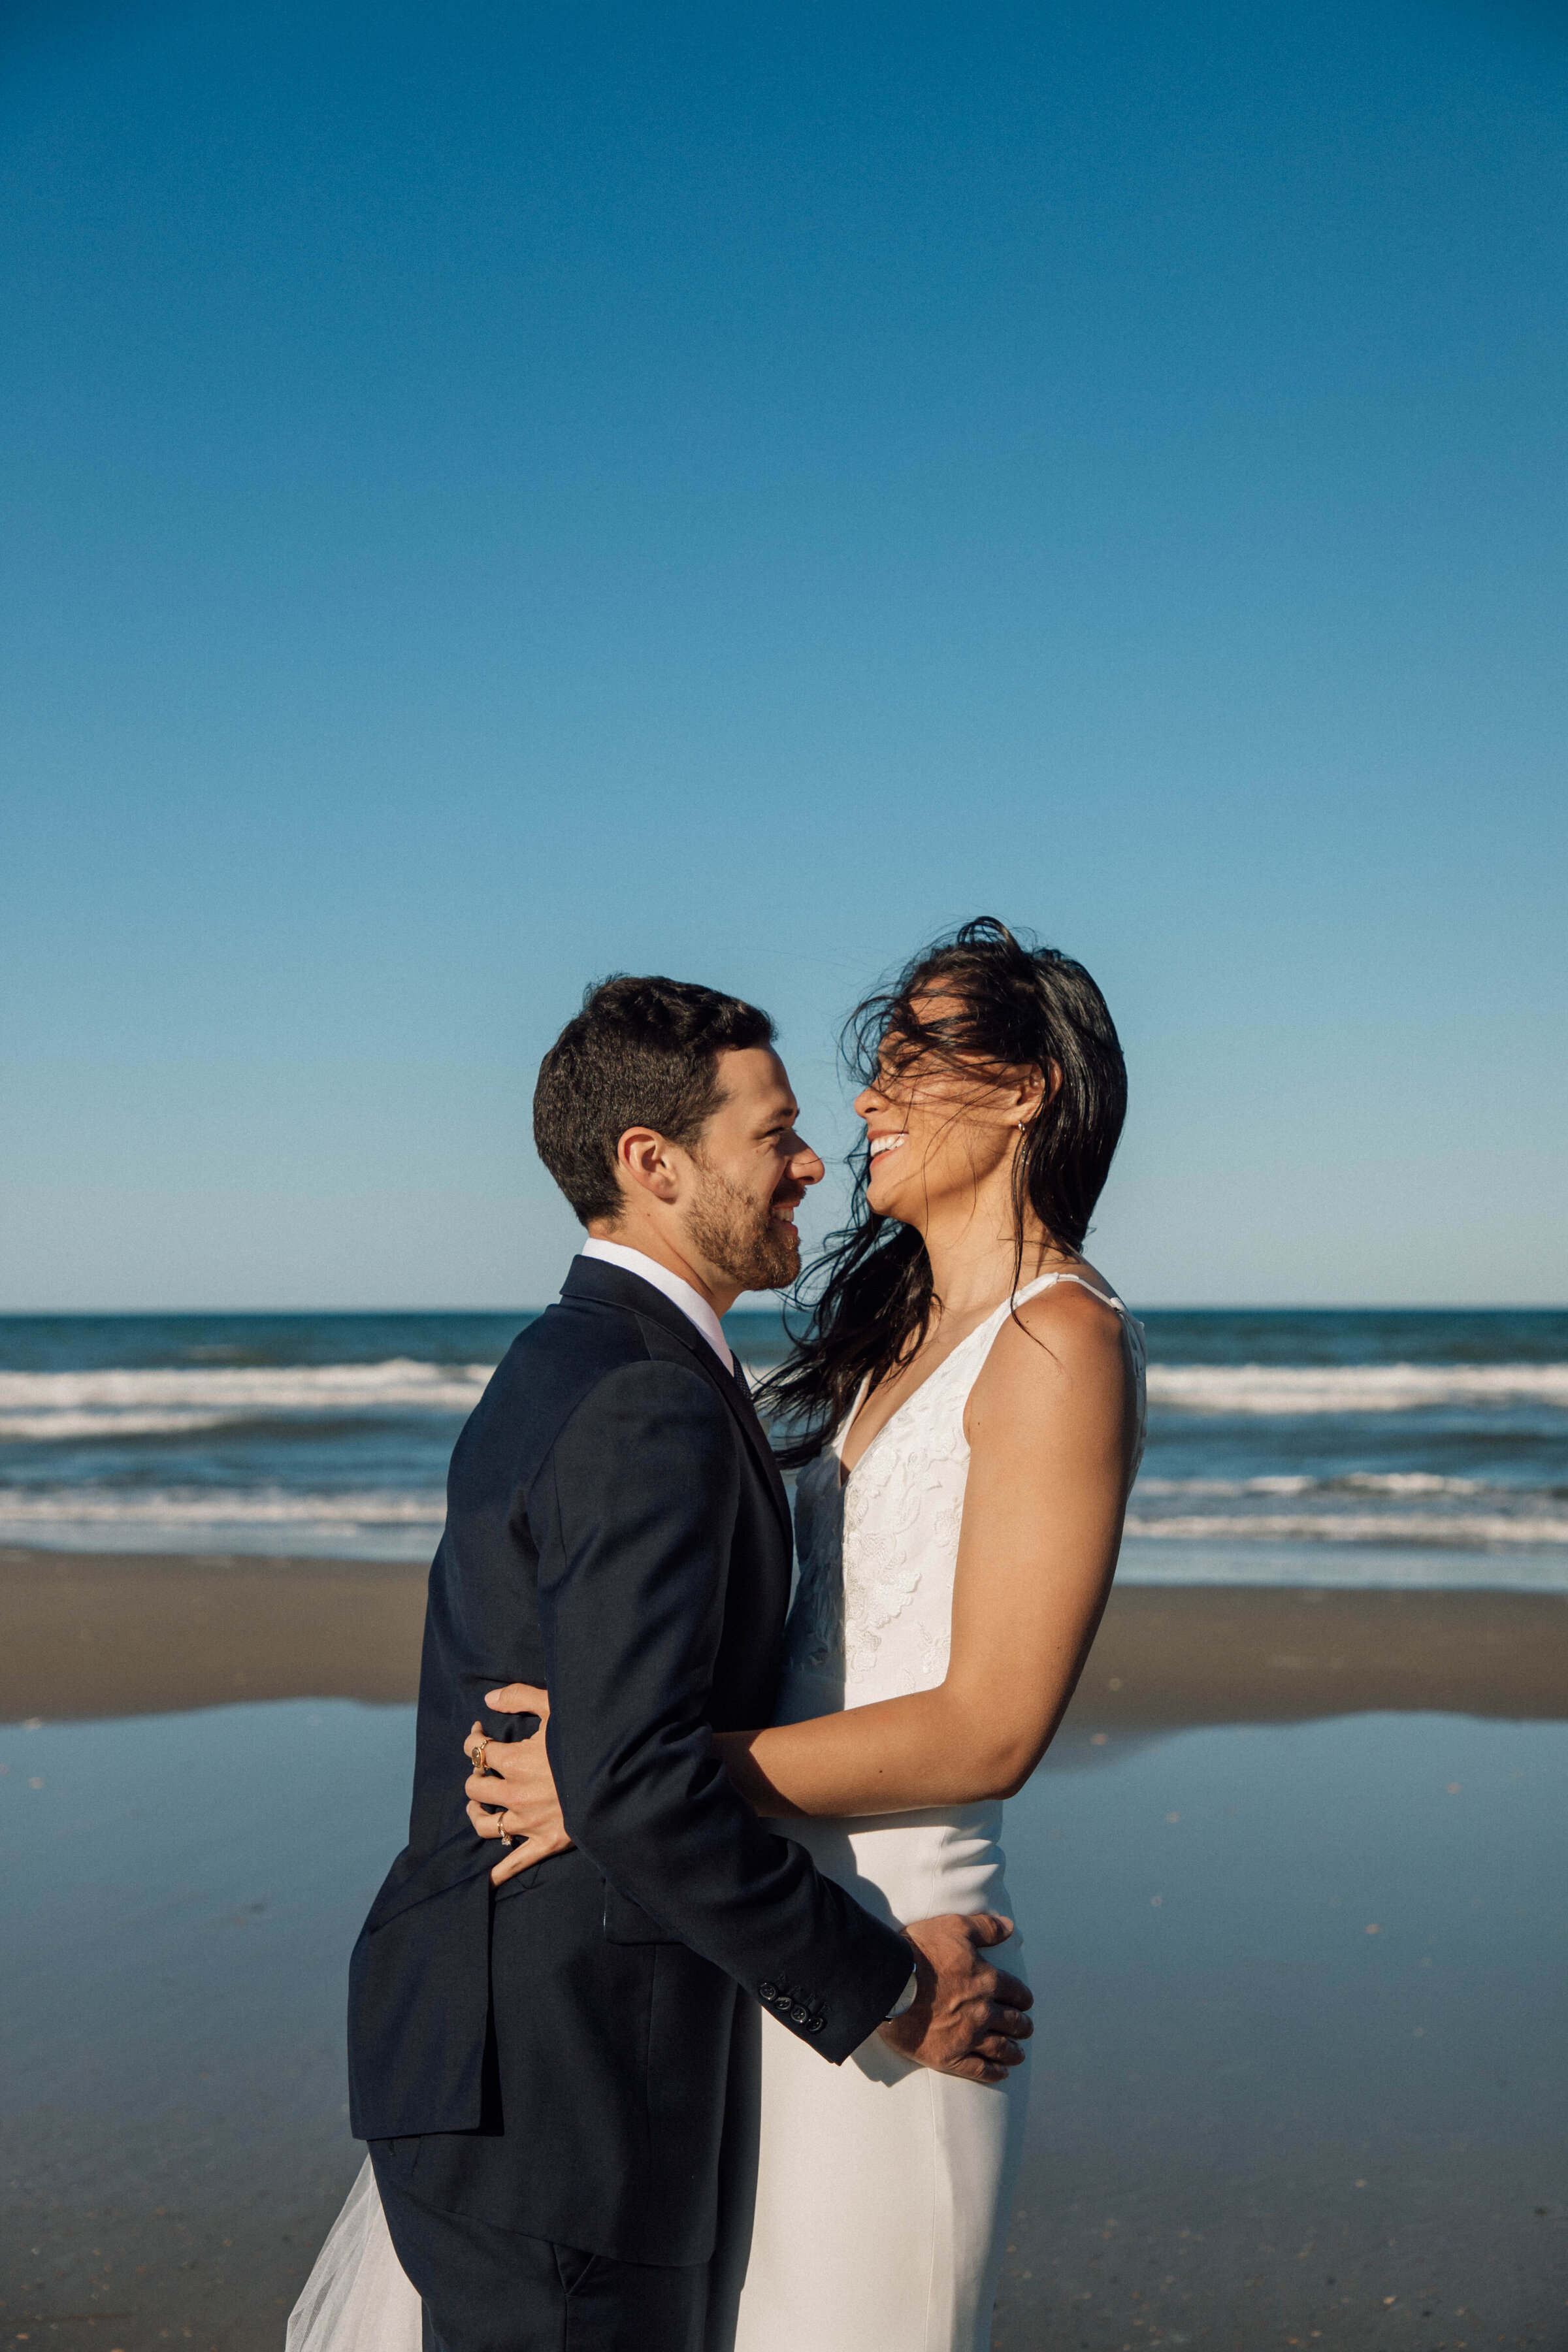 direct sunlight bride and groom Portraits, outer banks wedding in north carolina summer wedding